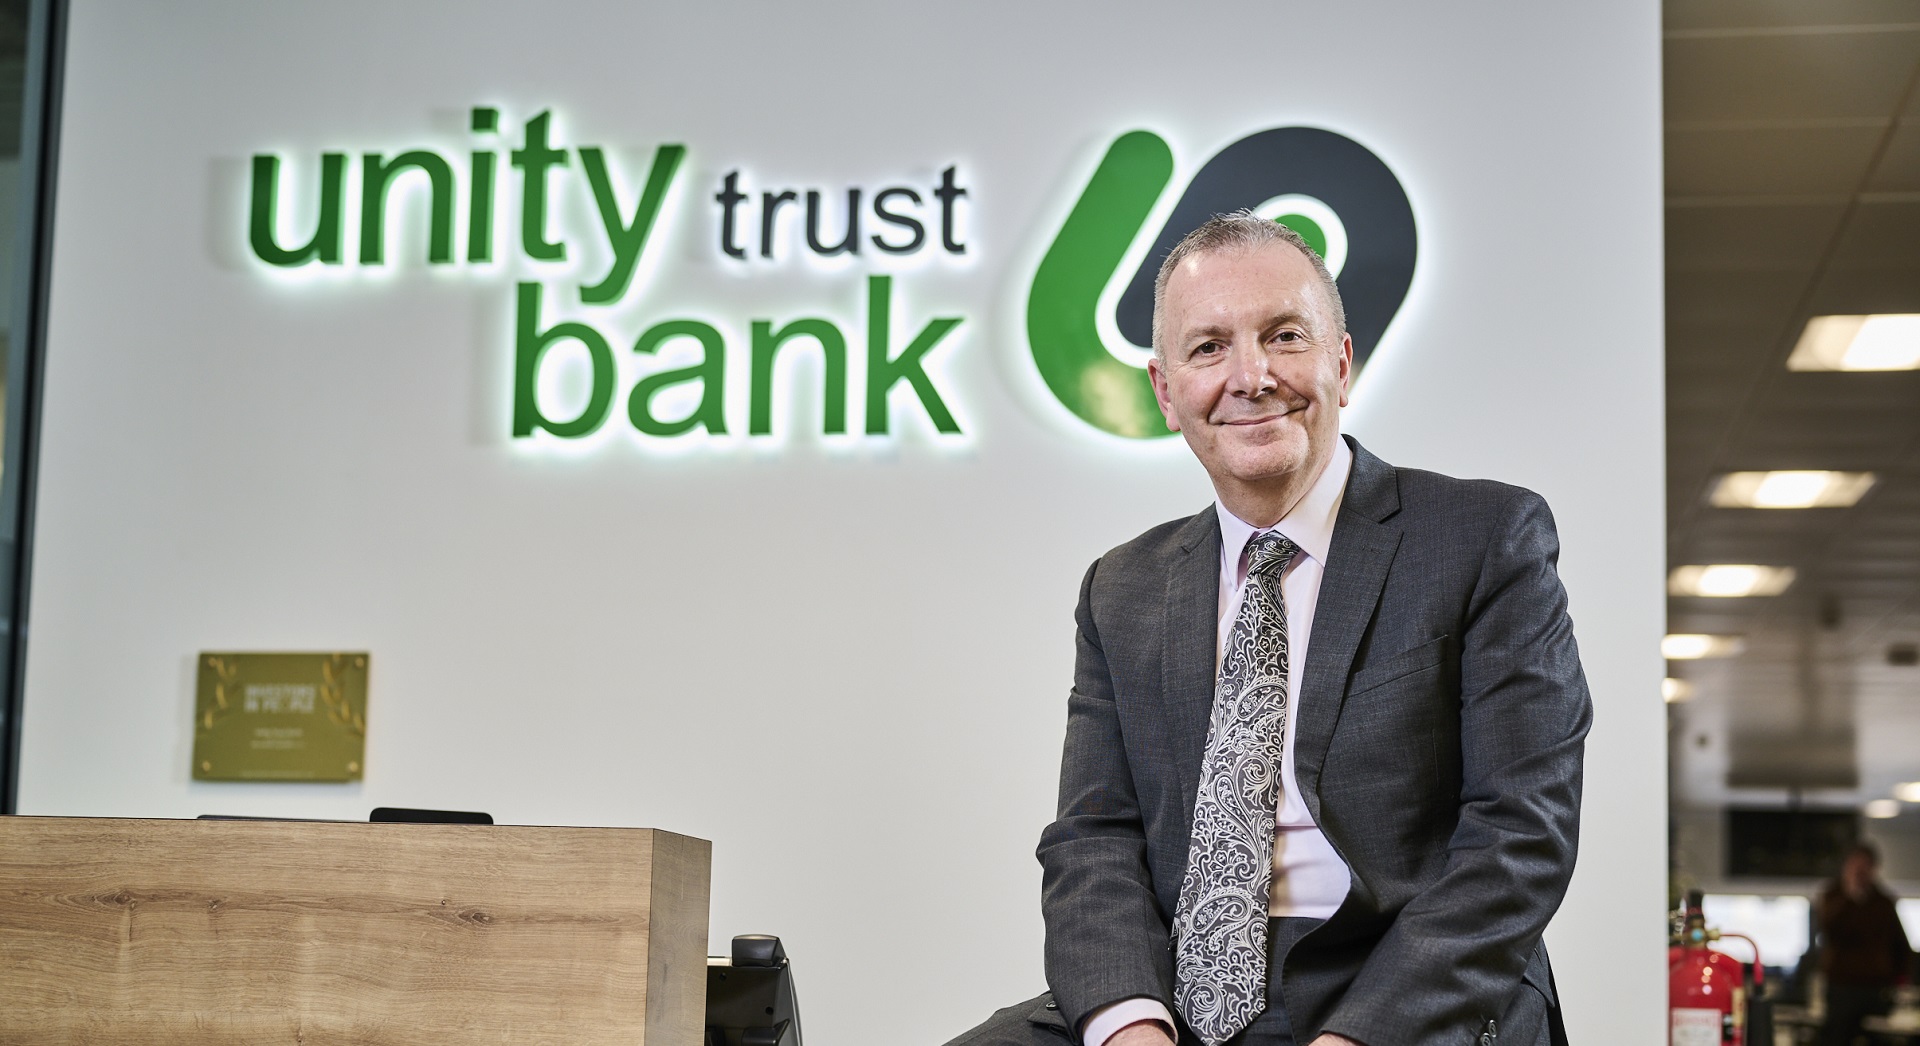 Colin Fyfe, CEO of Unity Trust Bank 2